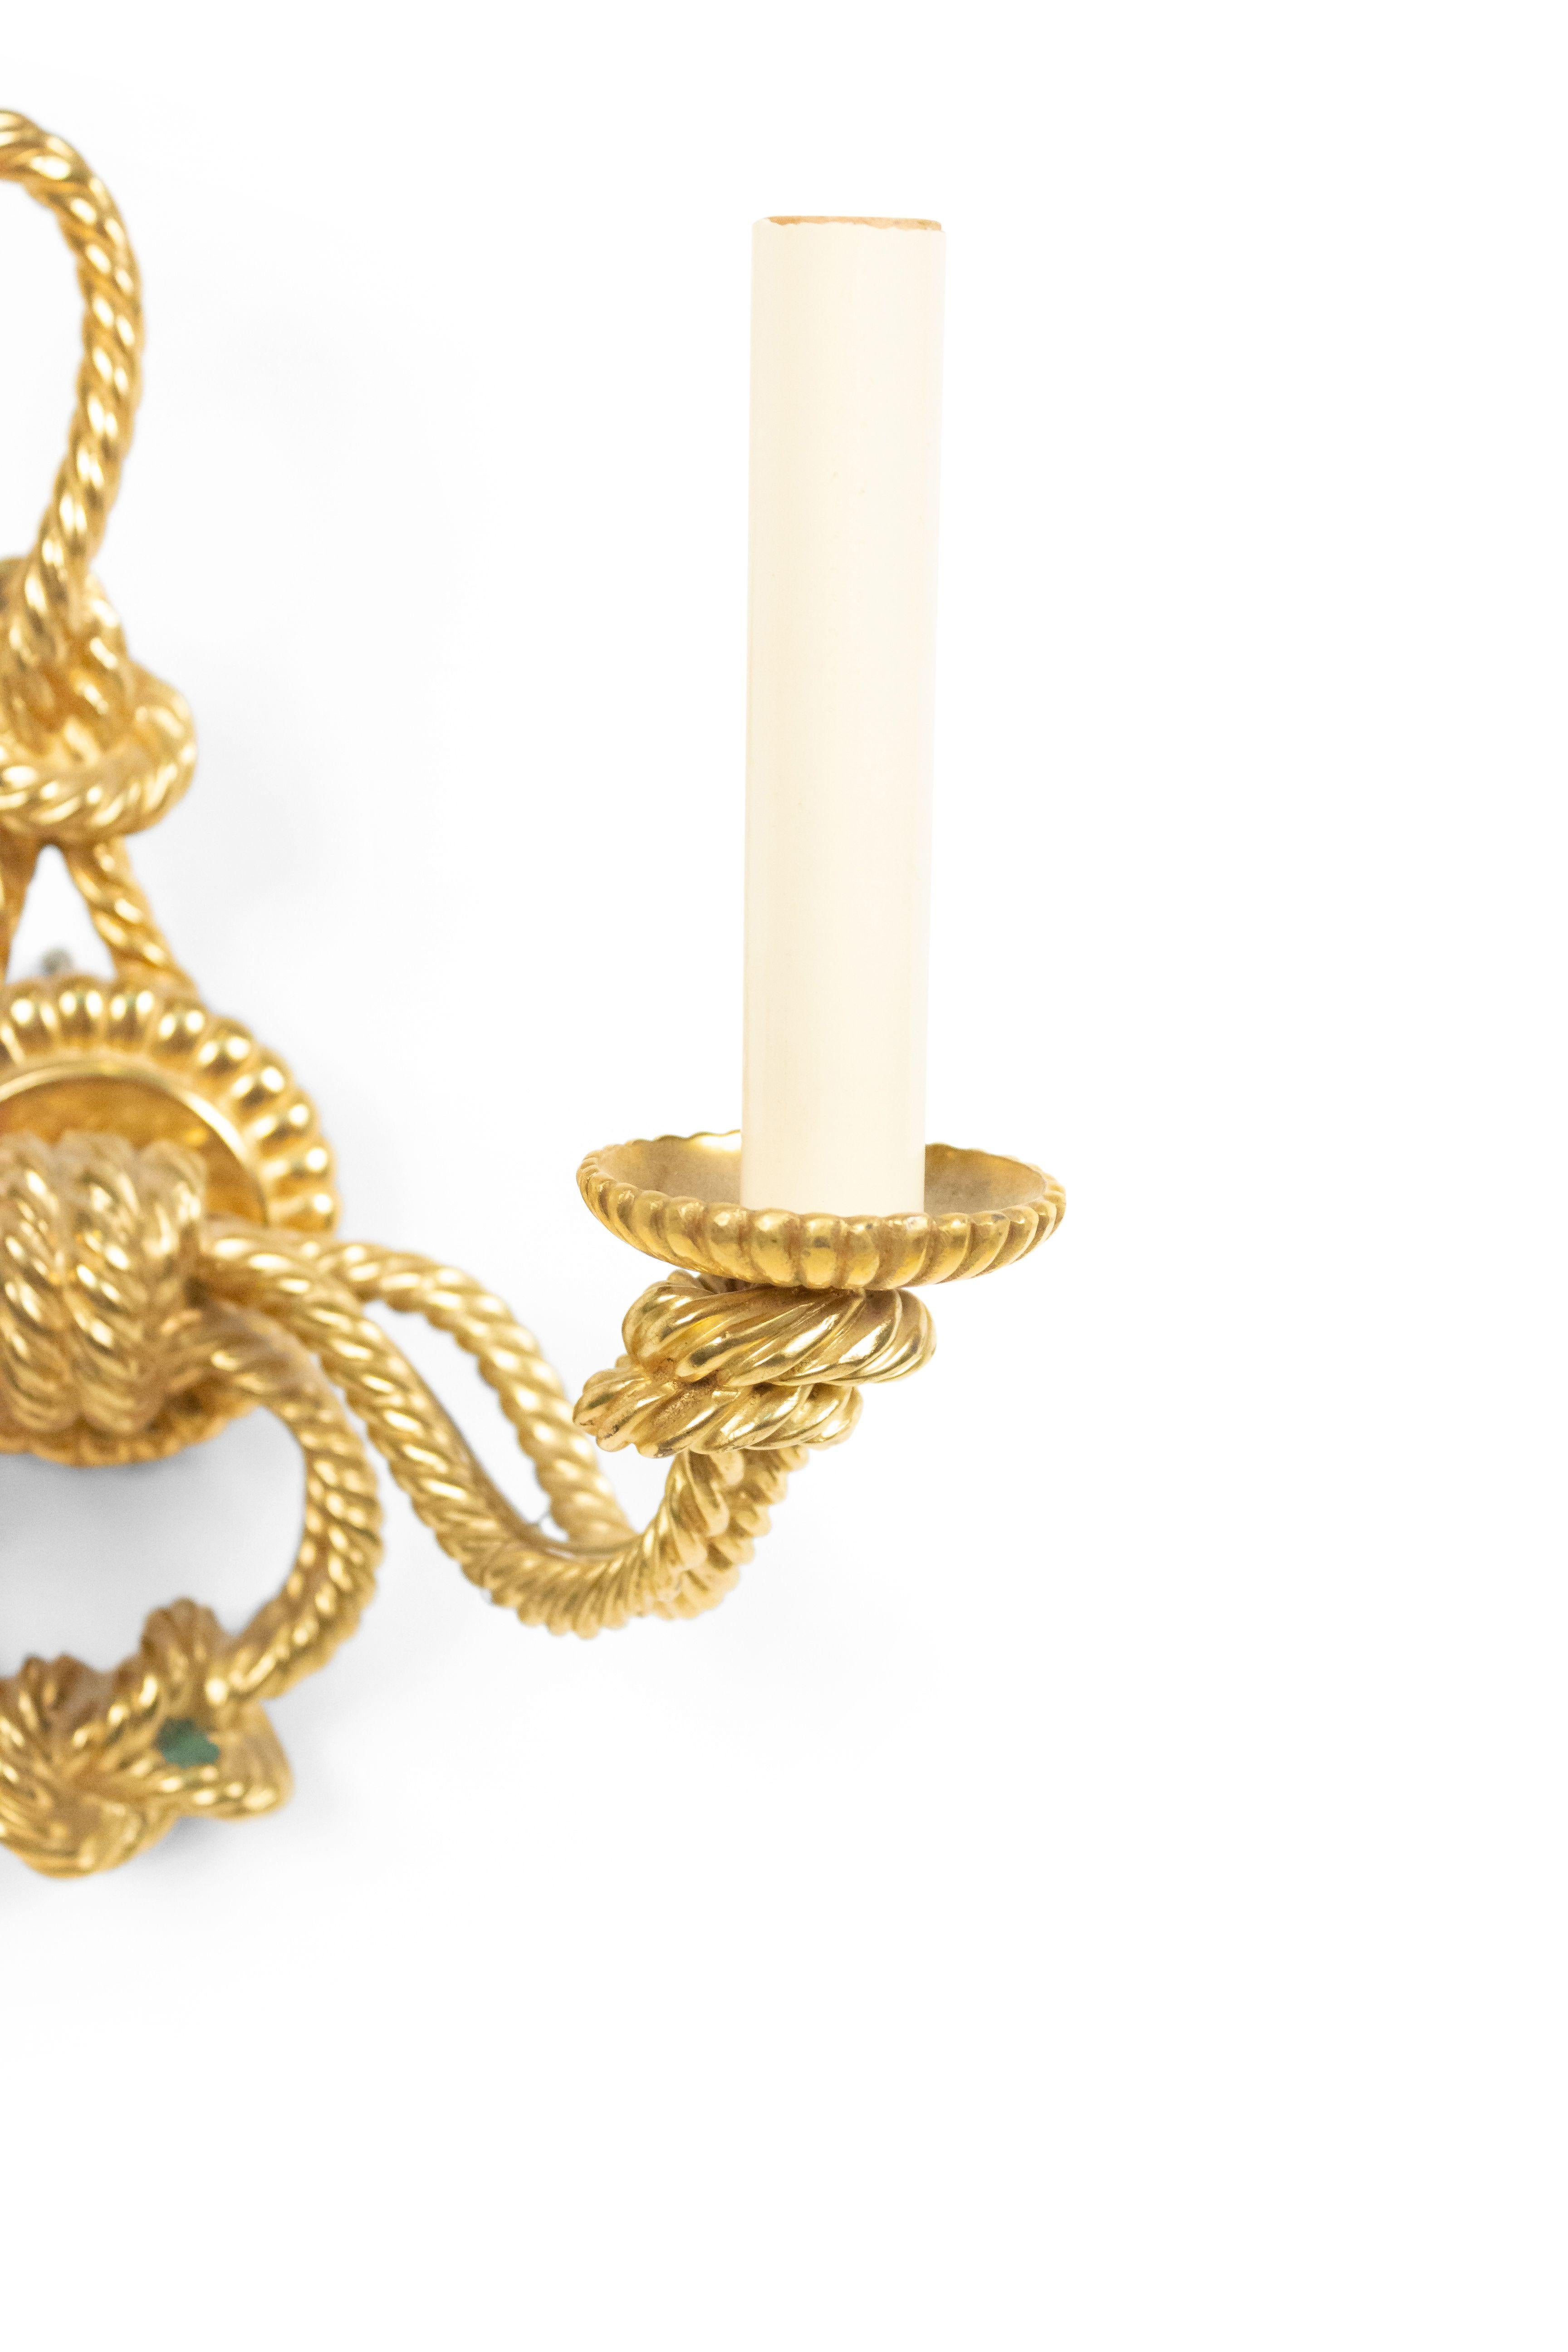 Rope and tassel design gilt bronze 2 arm wall sconce, 20th century. One available.